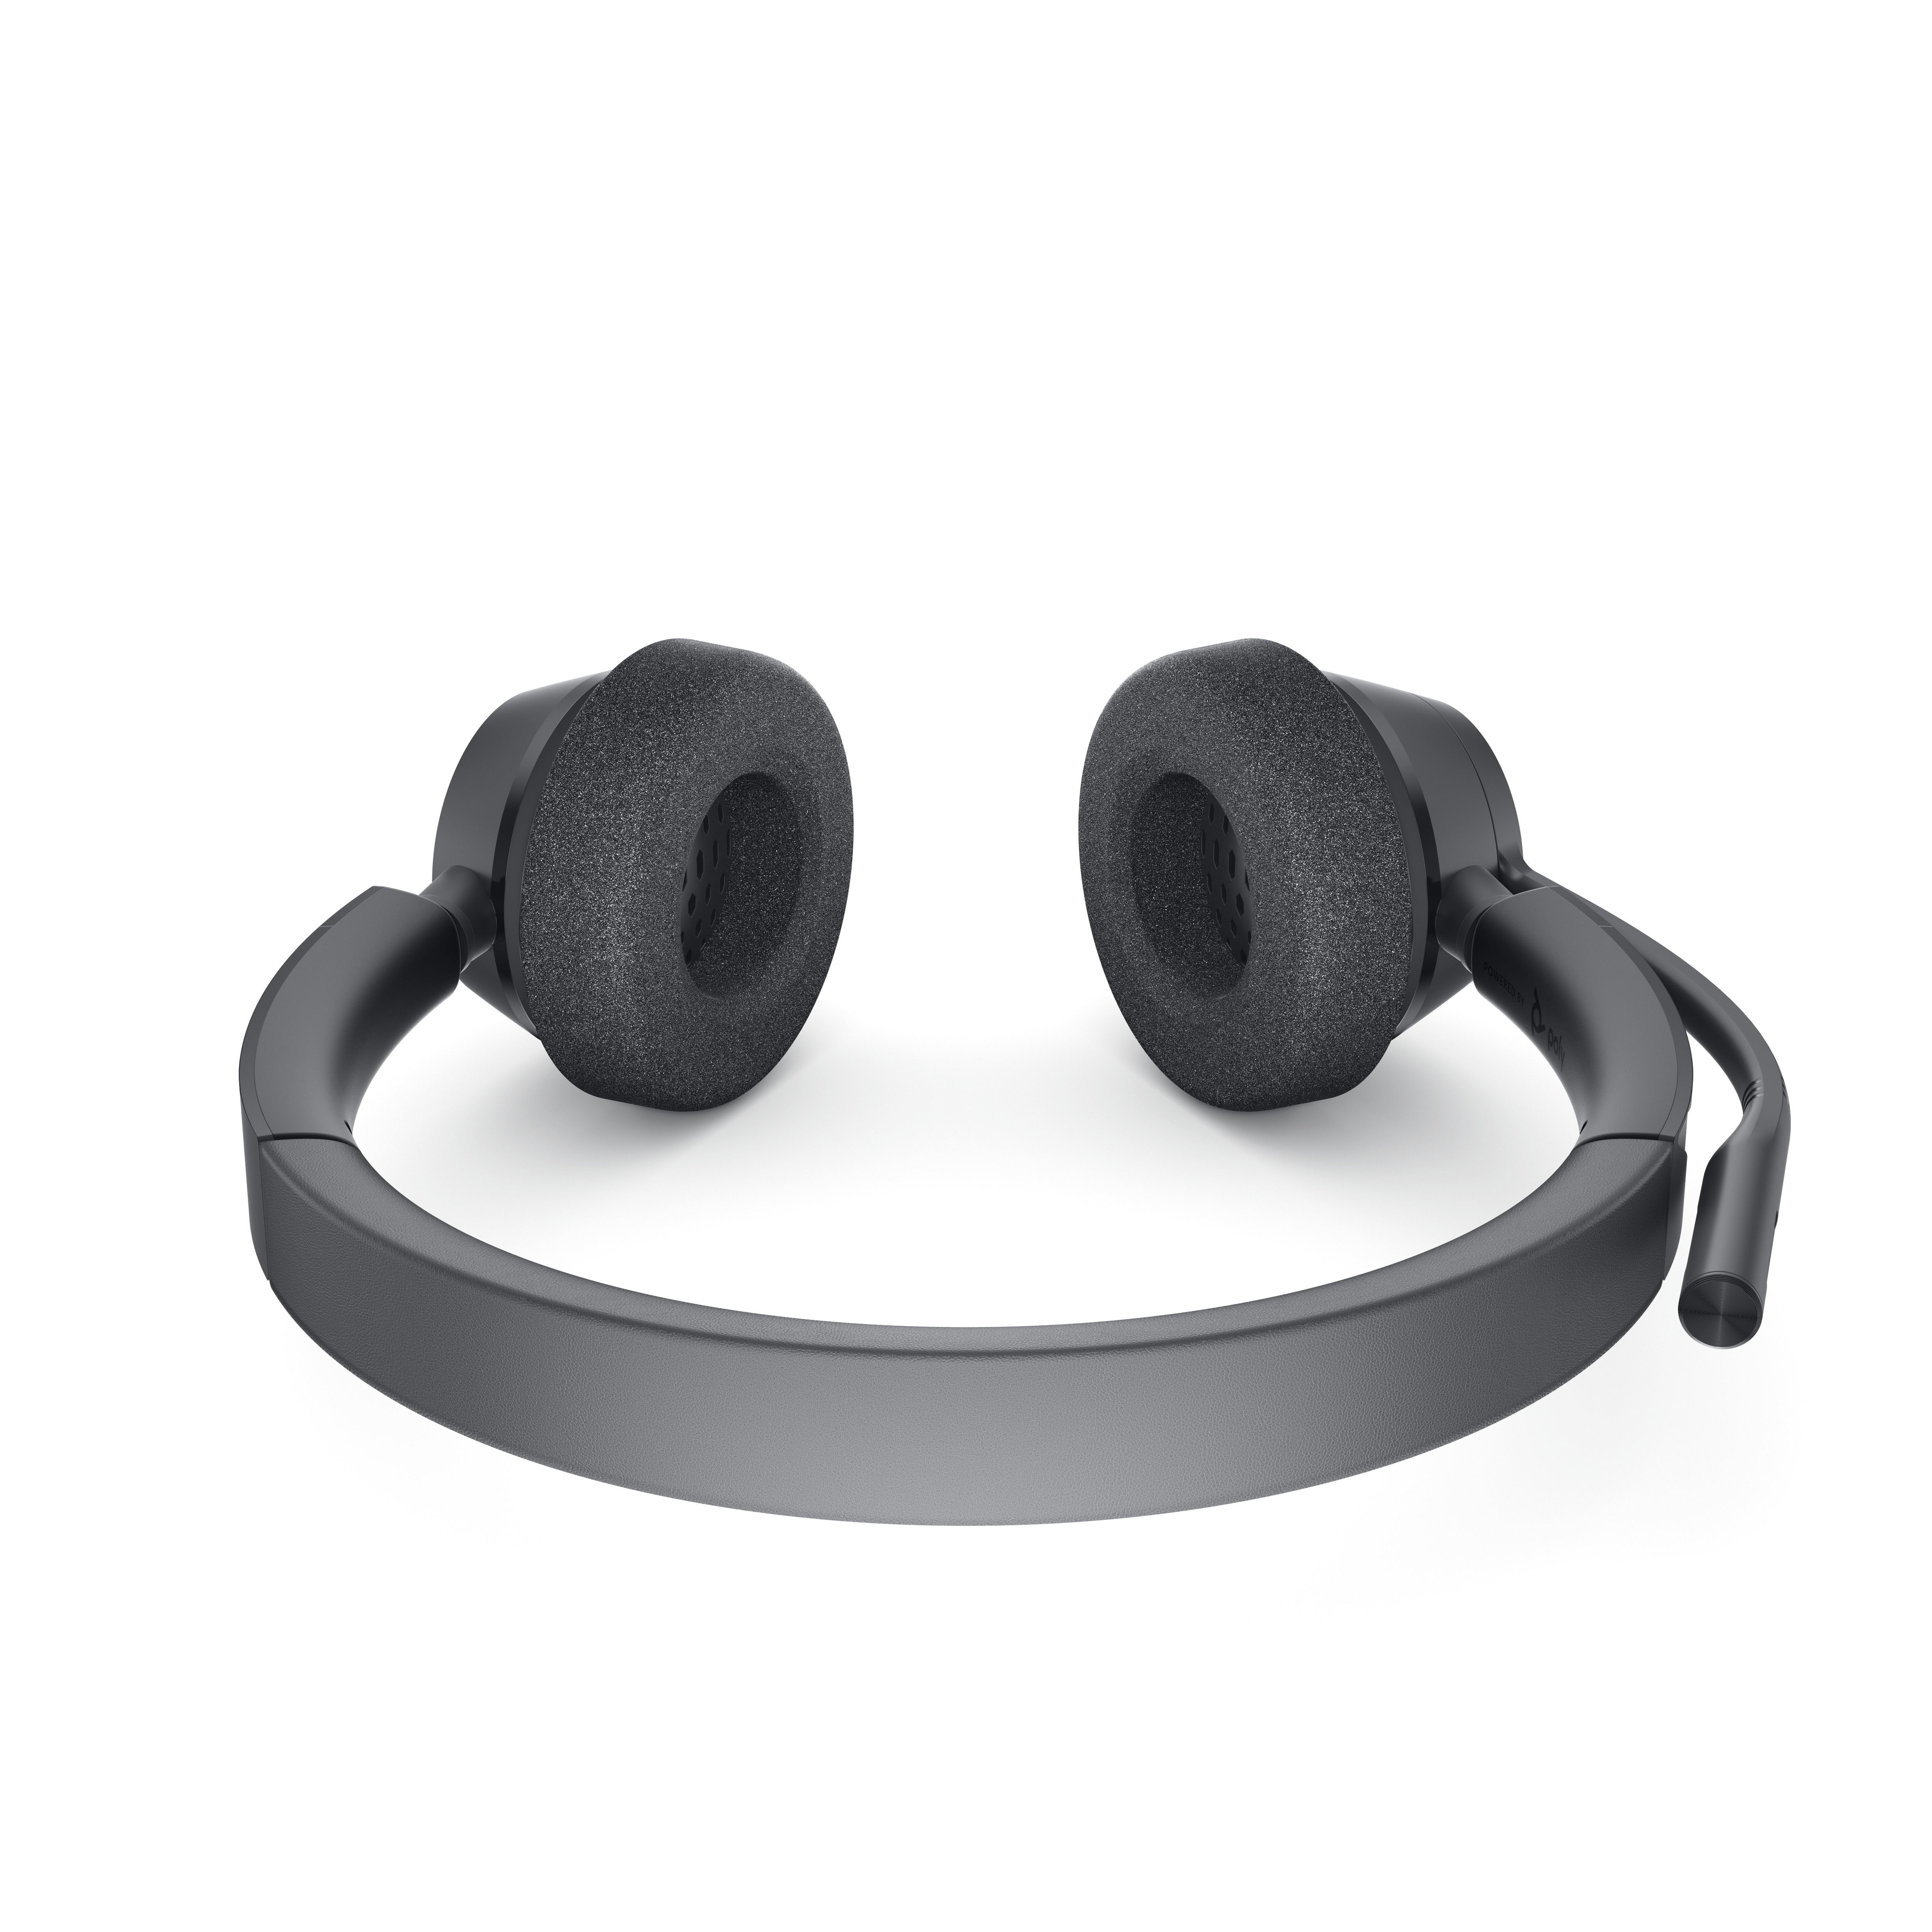 Dell Pro Stereo Headset WH3022 - Headset